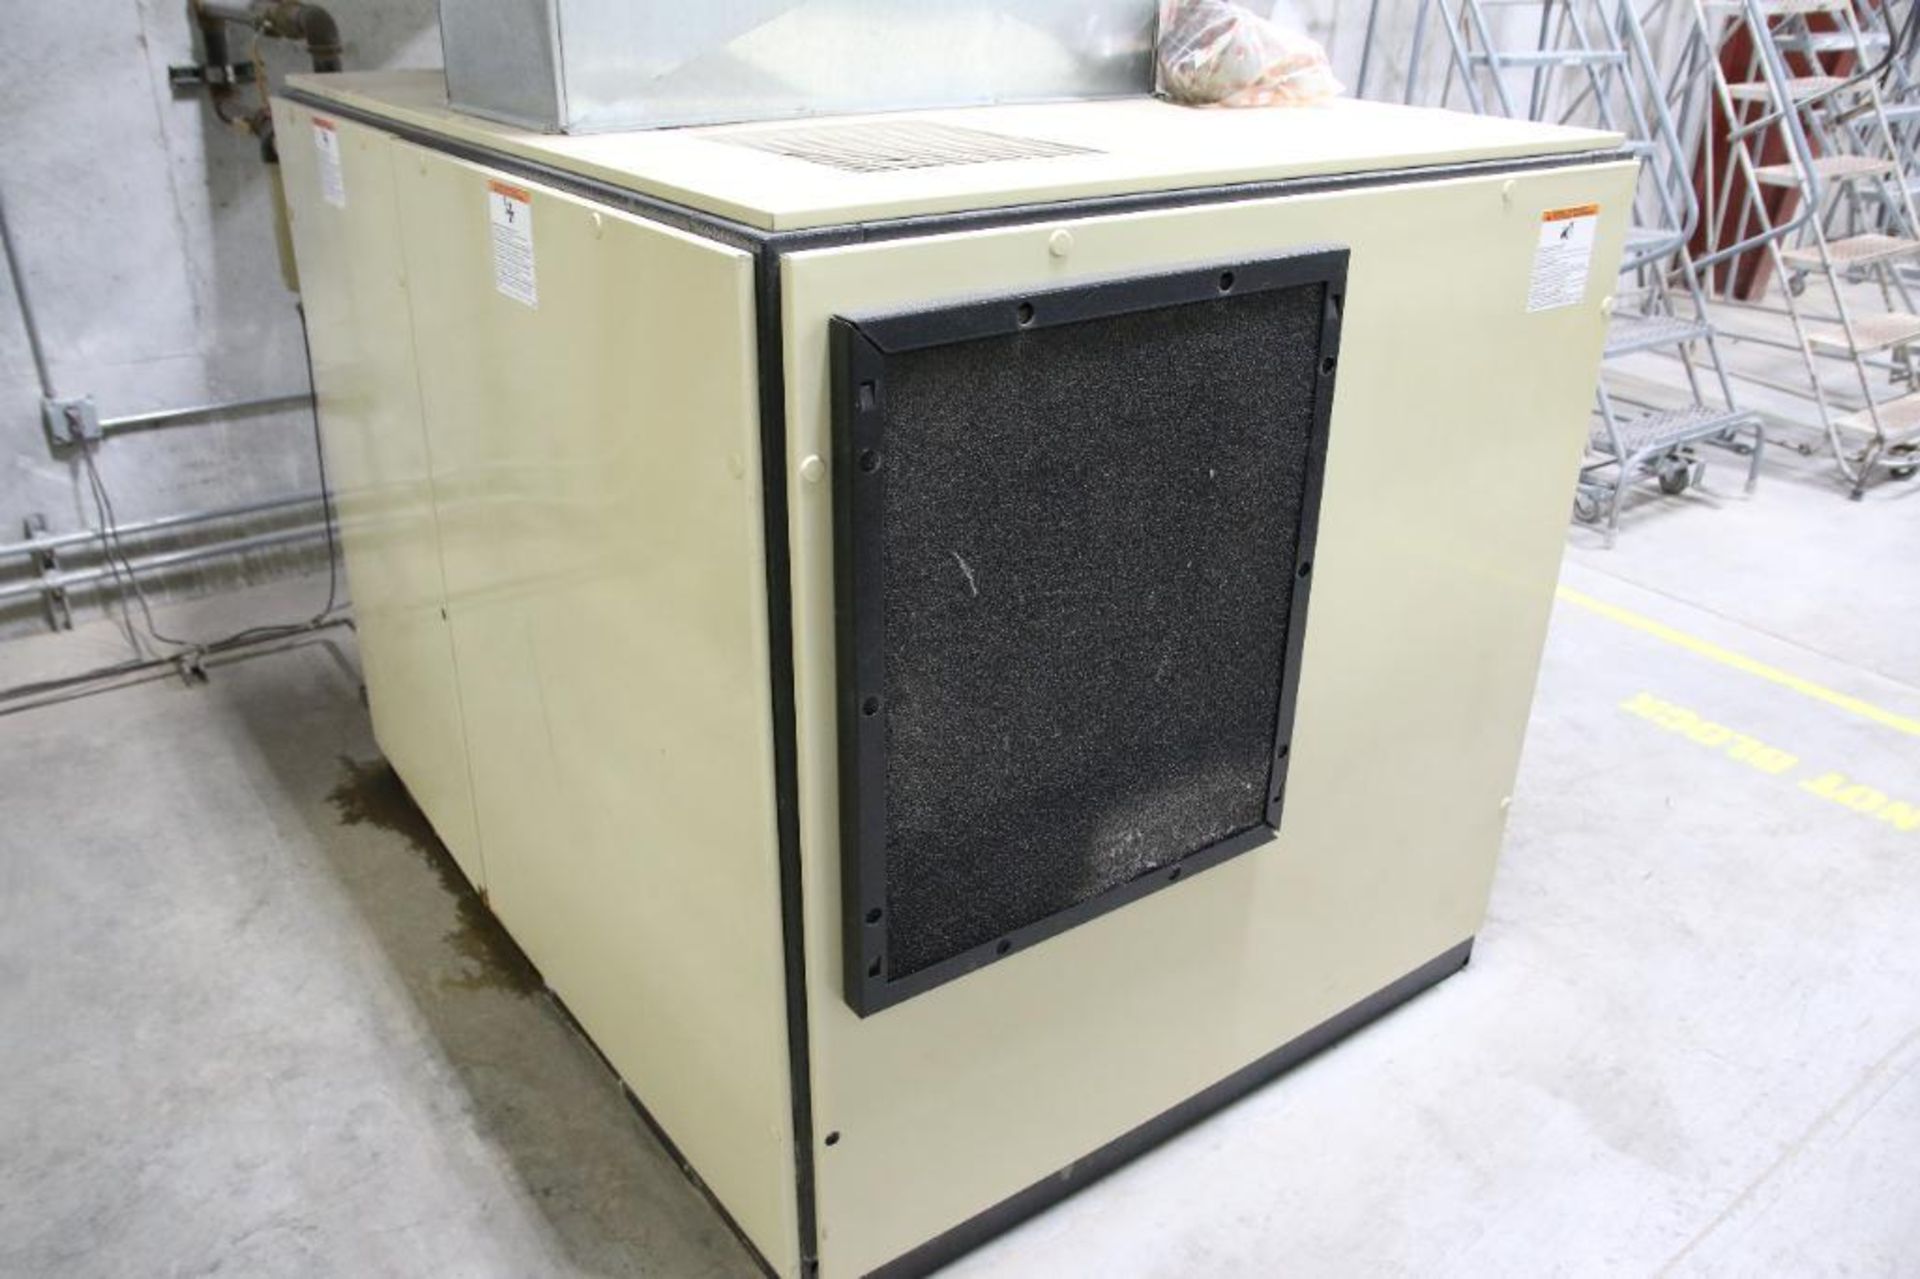 Ingersoll Rand UP6-50PEI-125 50-HP Rotary Screw Total Air System, 460V, 3 Phase, 125PSI, S/N CBV-106 - Image 3 of 5